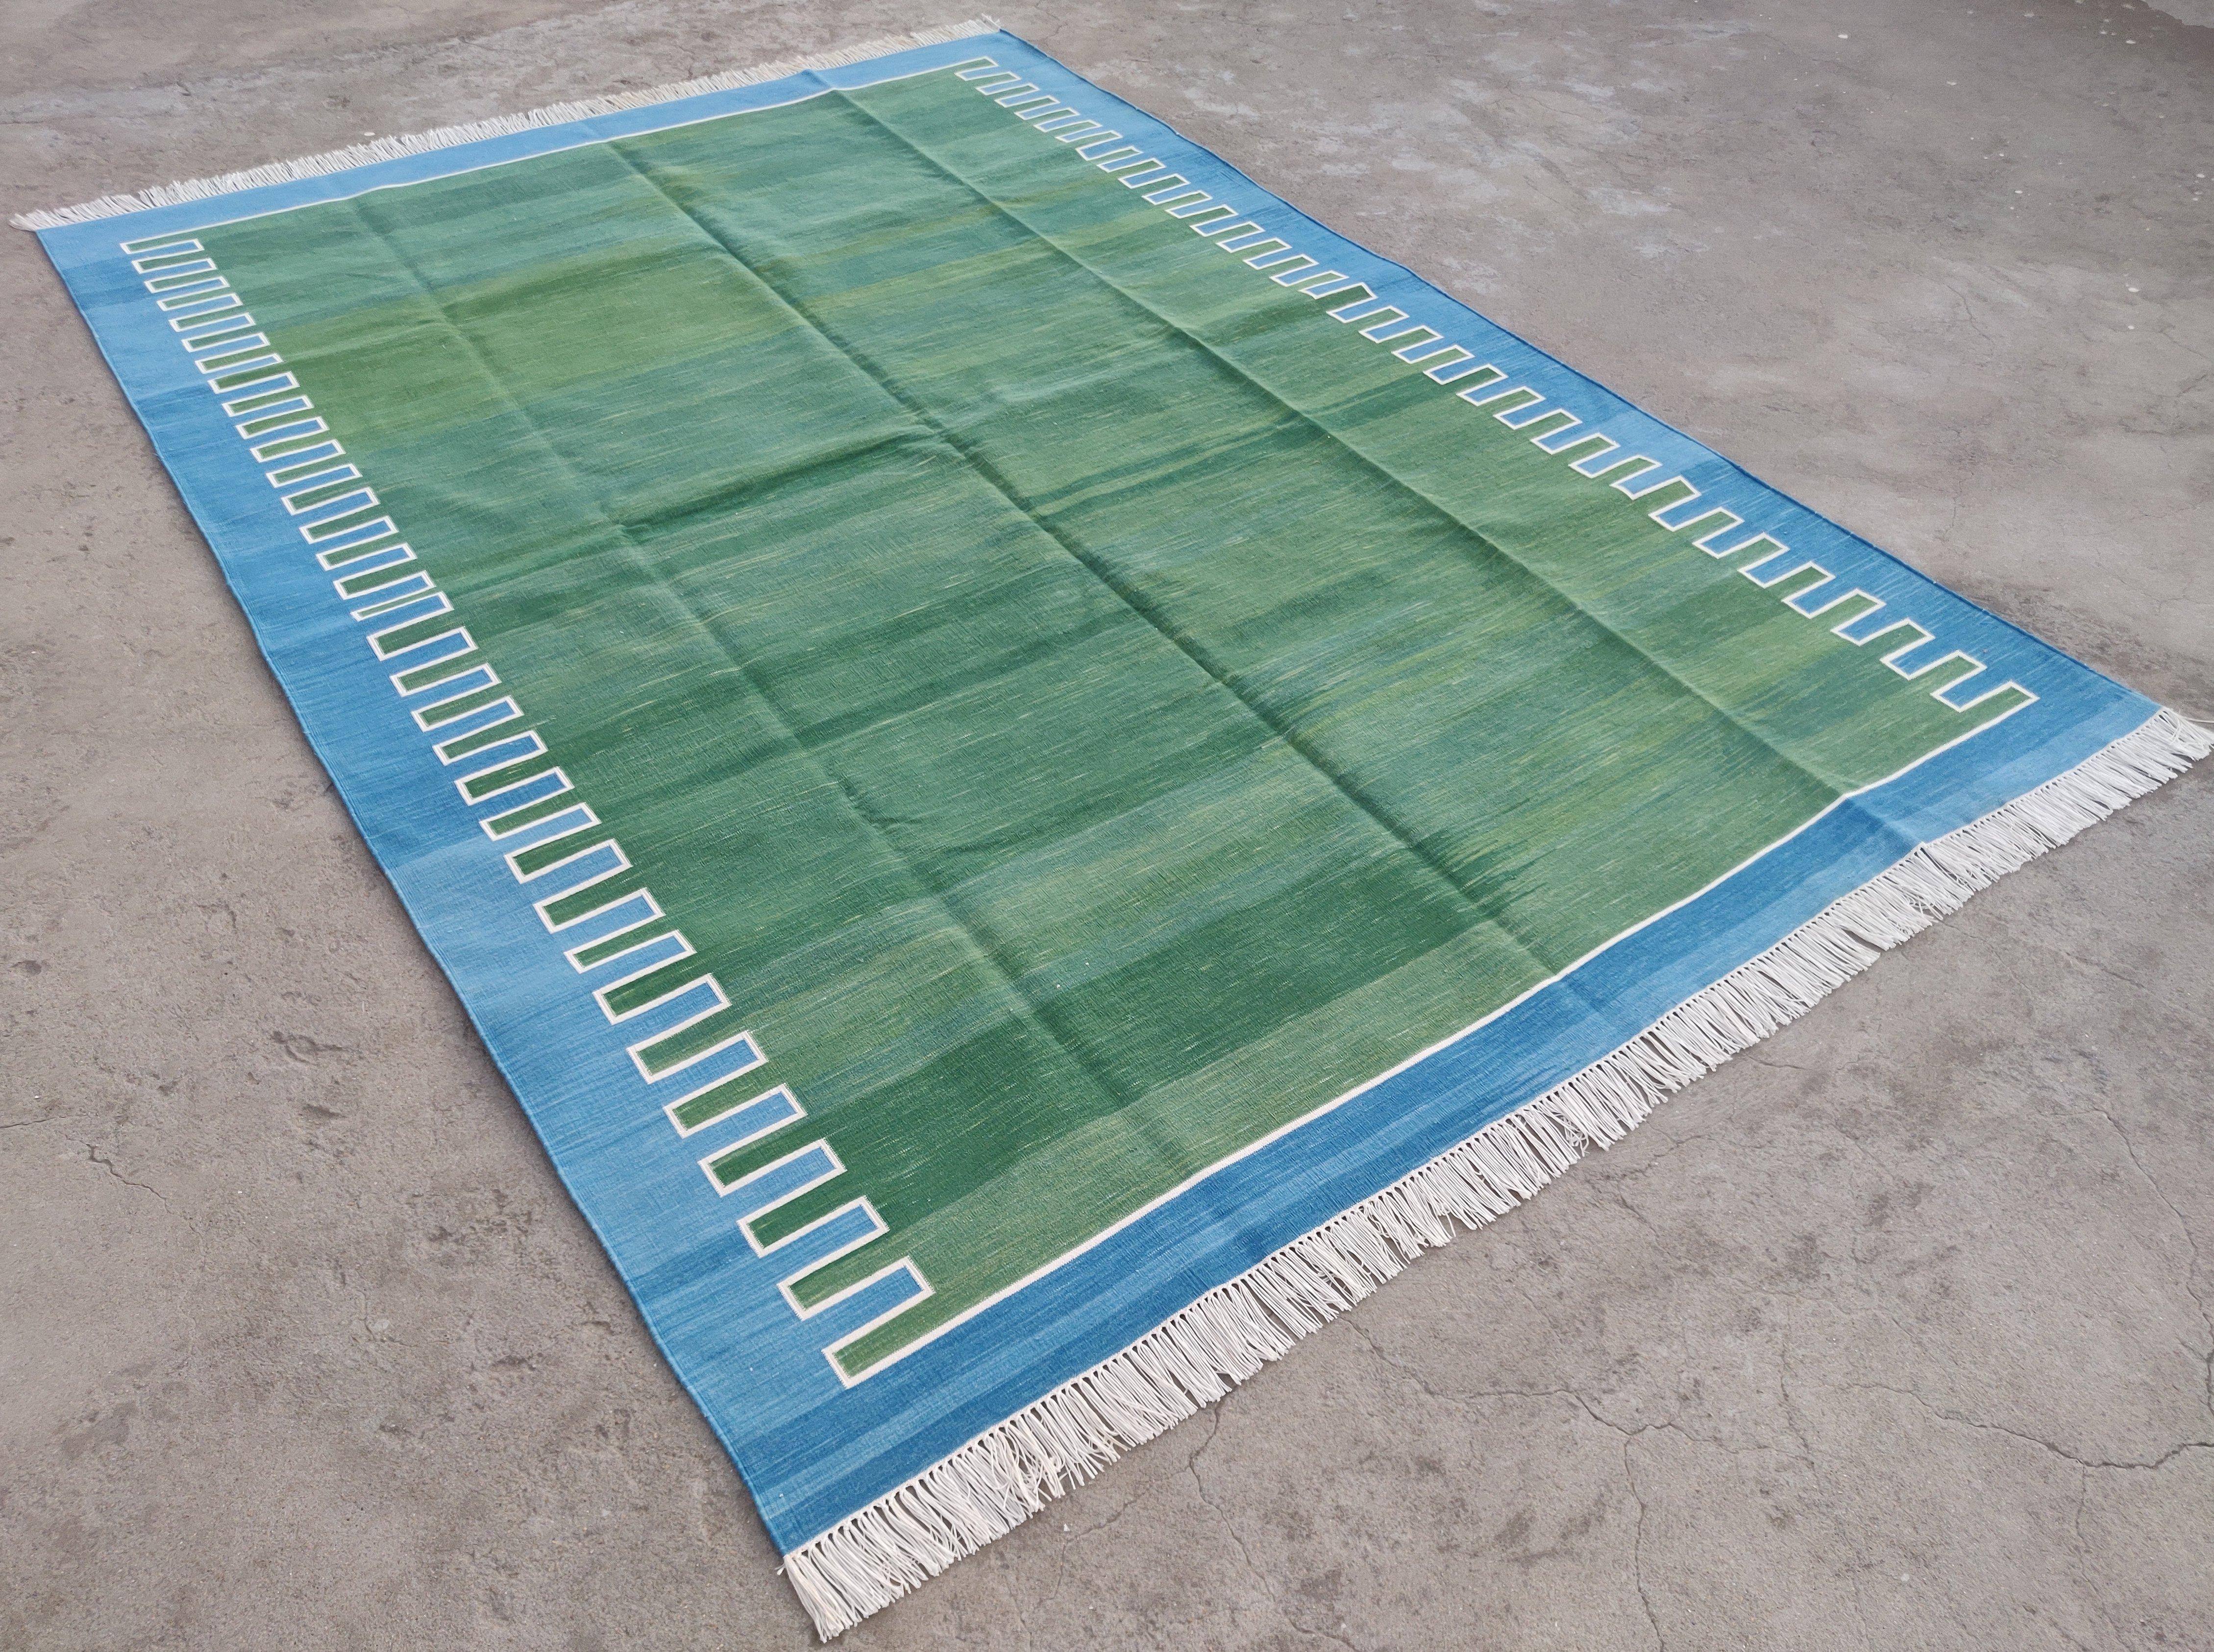 Cotton Vegetable Dyed Forest Green, Cream And Blue Zig Zag Striped Indian Dhurrie Rug-6'x9' 
These special flat-weave dhurries are hand-woven with 15 ply 100% cotton yarn. Due to the special manufacturing techniques used to create our rugs, the size